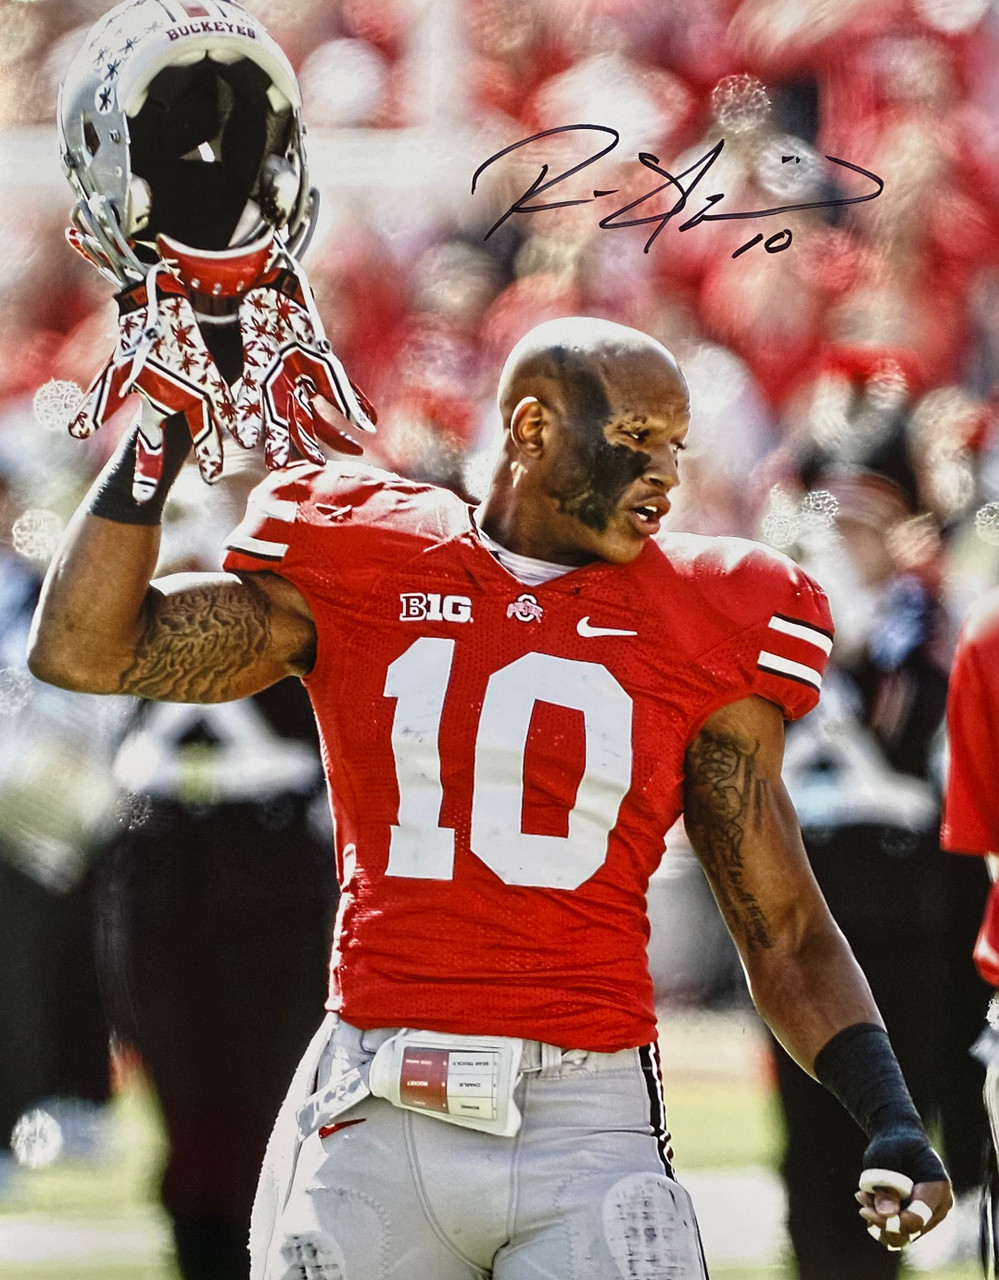 Ryan Shazier Ohio State Buckeyes 16-13 16x20 Autographed Photo - Certified Authentic